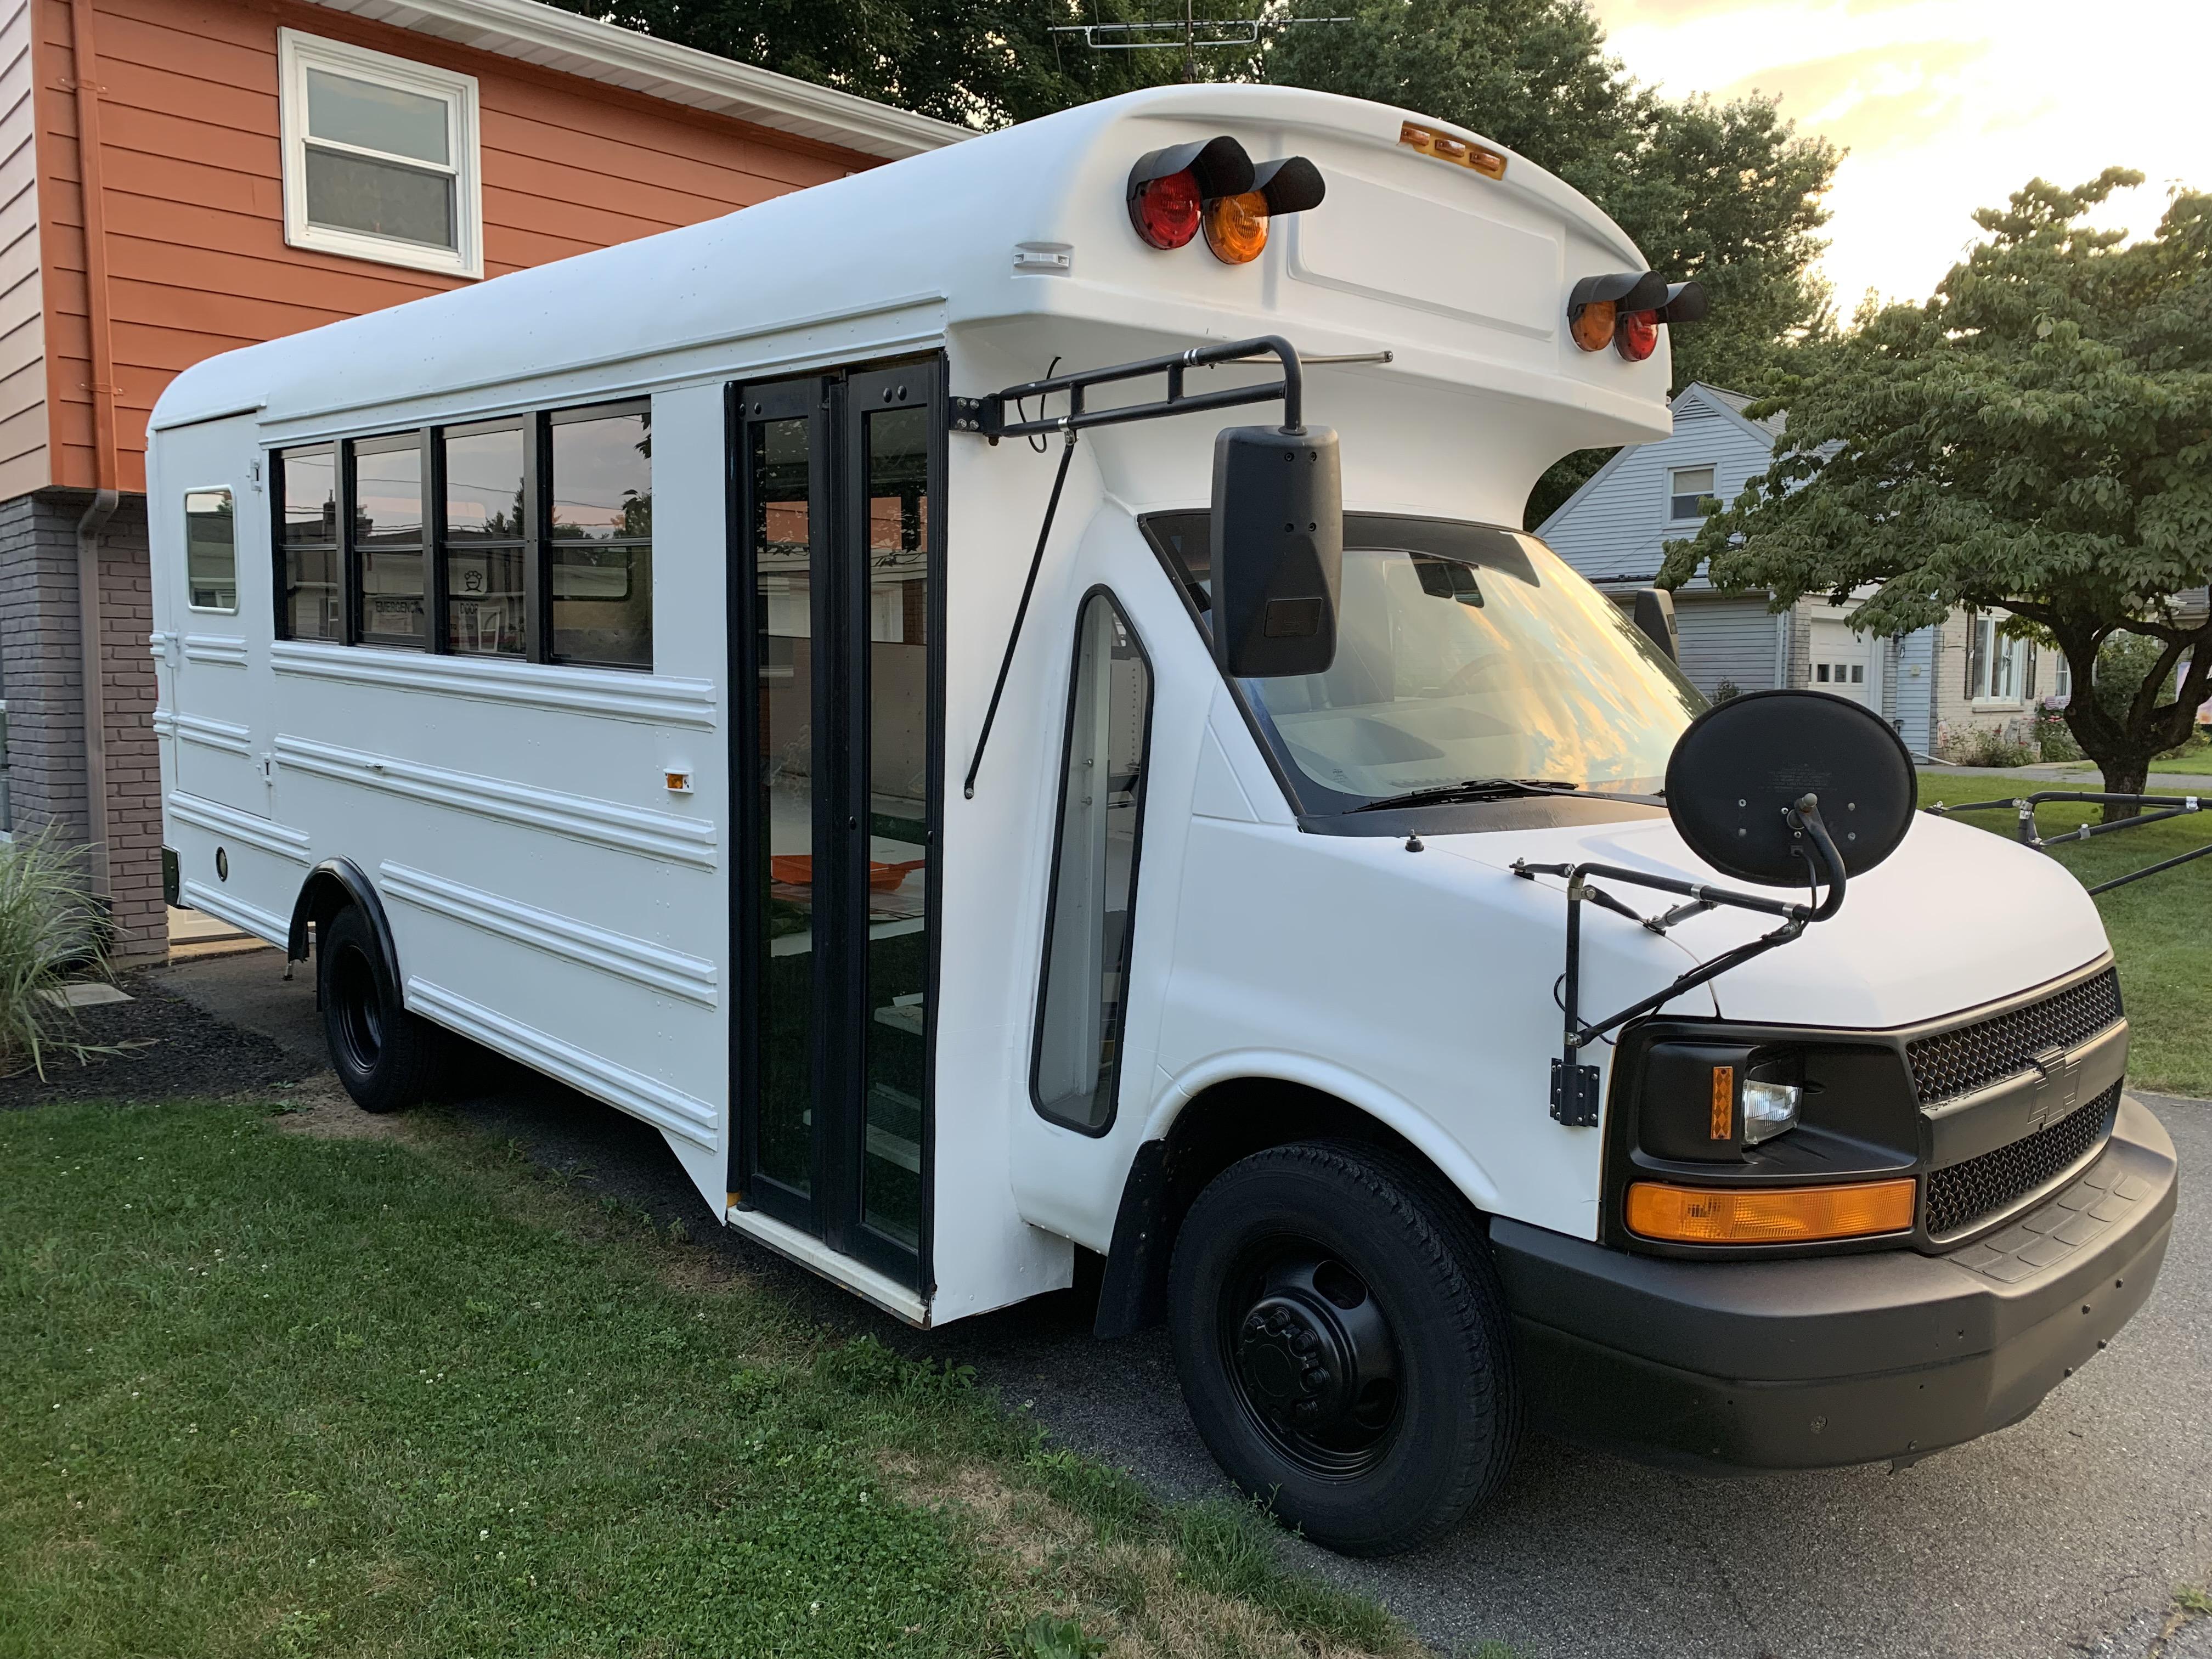 Selling our build-ready Skoolie! 2005 Chevy Express 3500 6.0L Gas w/ 108k  original miles. Eastern Pennsylvania area. DM if interested. Ad is in  comments. Thanks! : r/skoolies